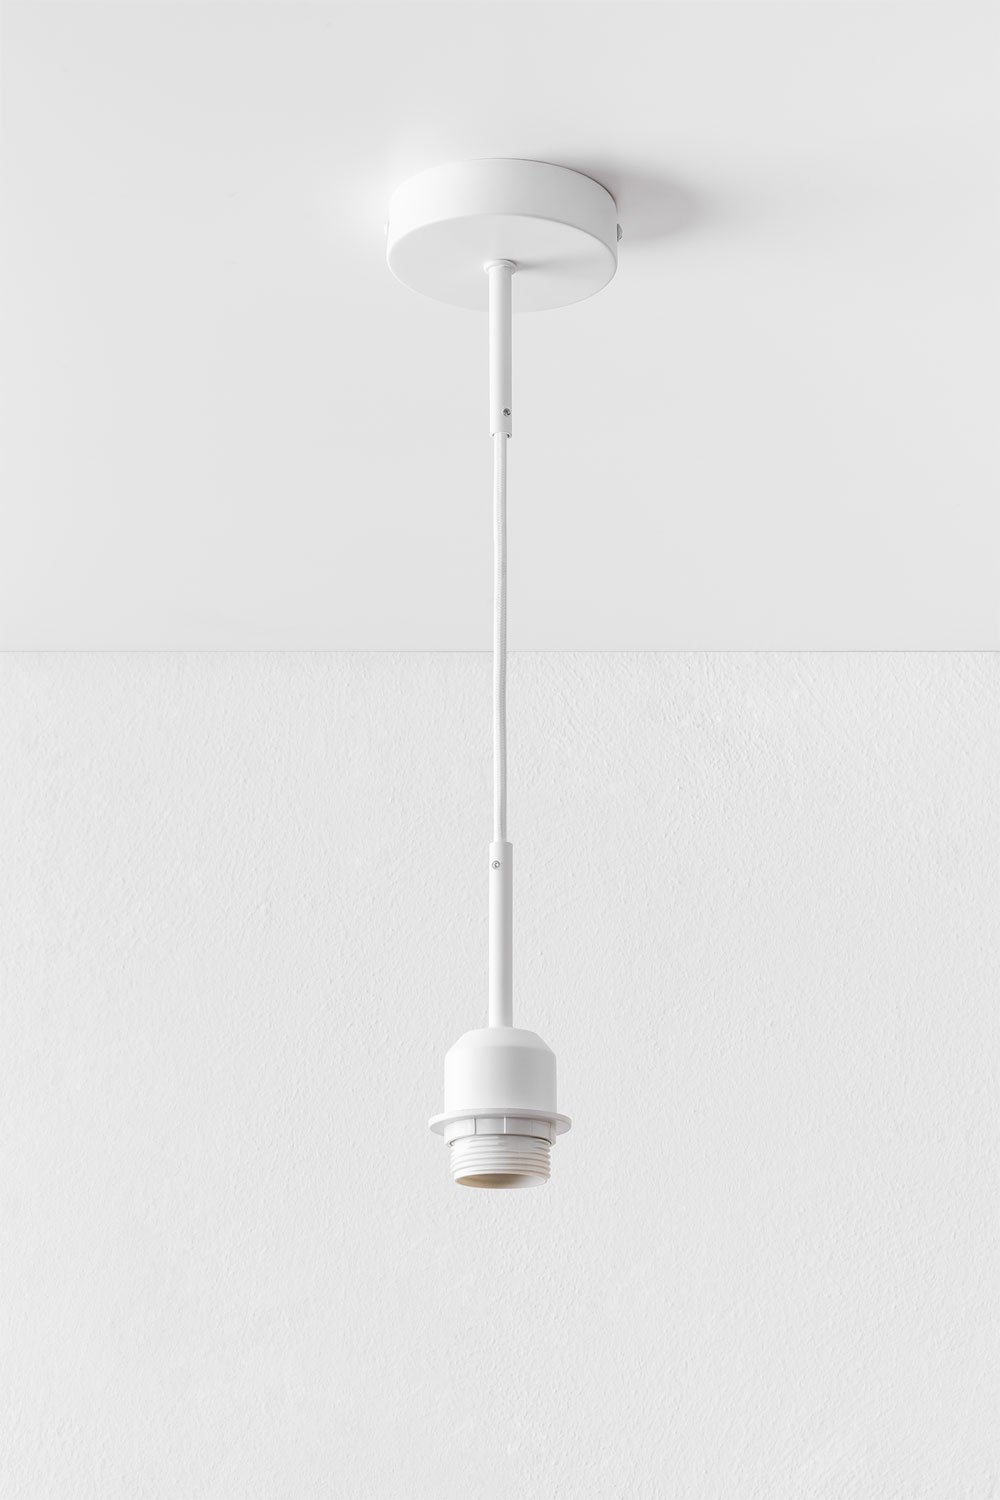 Cord for Hannon Ceiling Lamp, gallery image 1